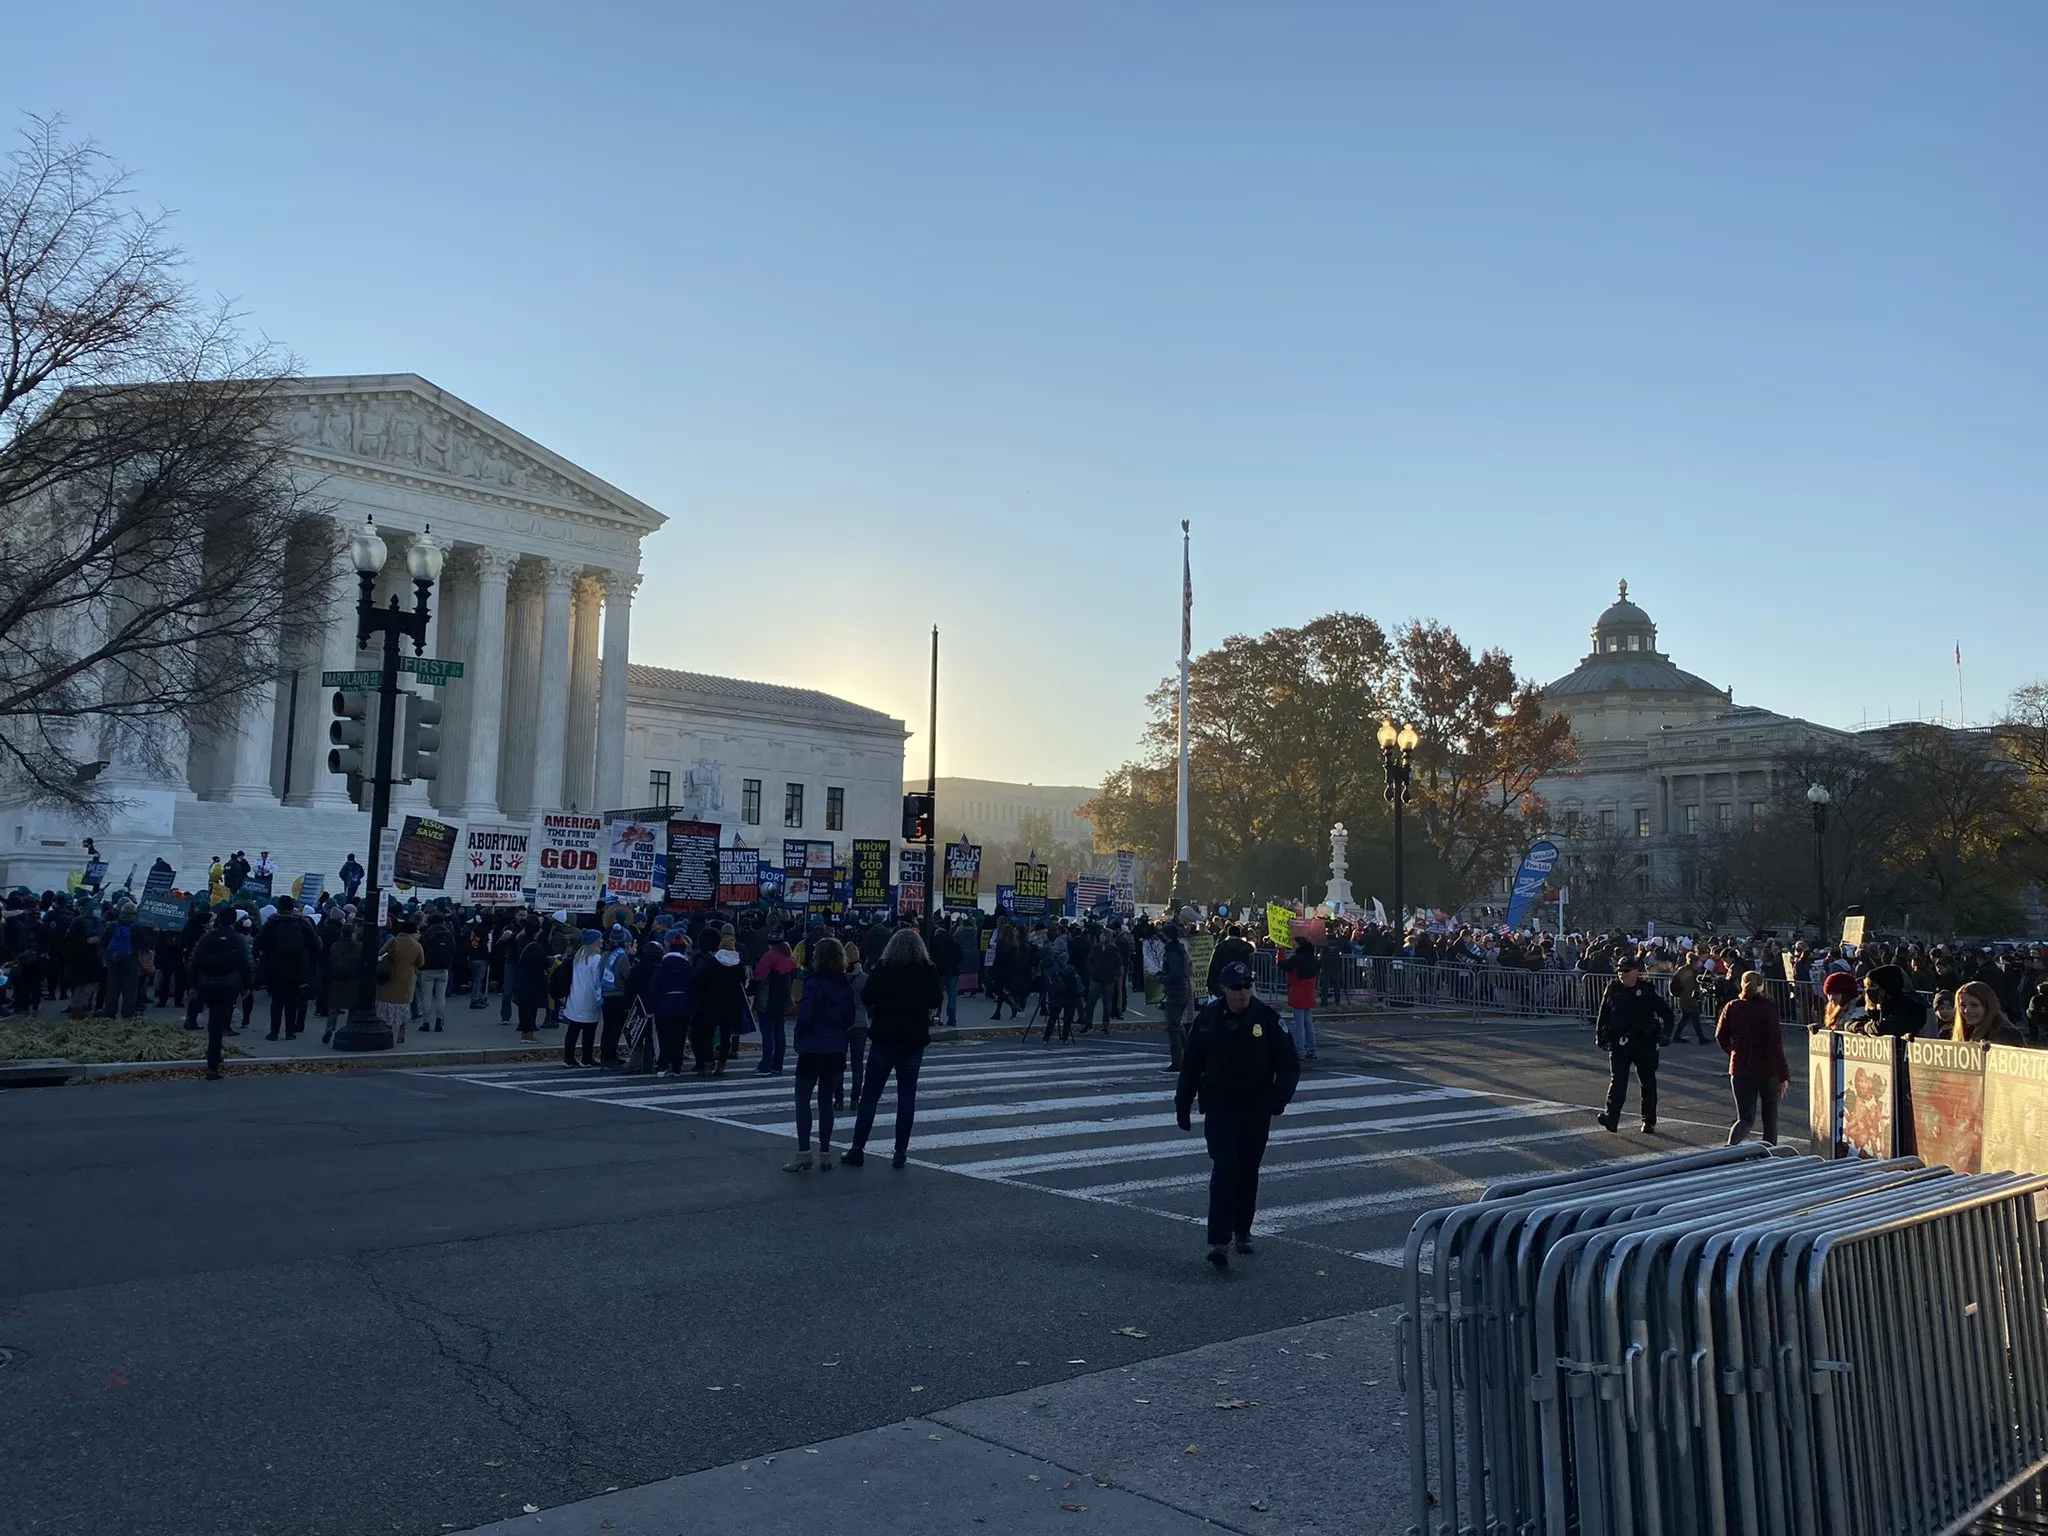 Groups gathered outside the Supreme Court on Wednesday, Dec. 1, ahead of oral arguments in the case Dobbs v. Jackson Women's Health.?w=200&h=150